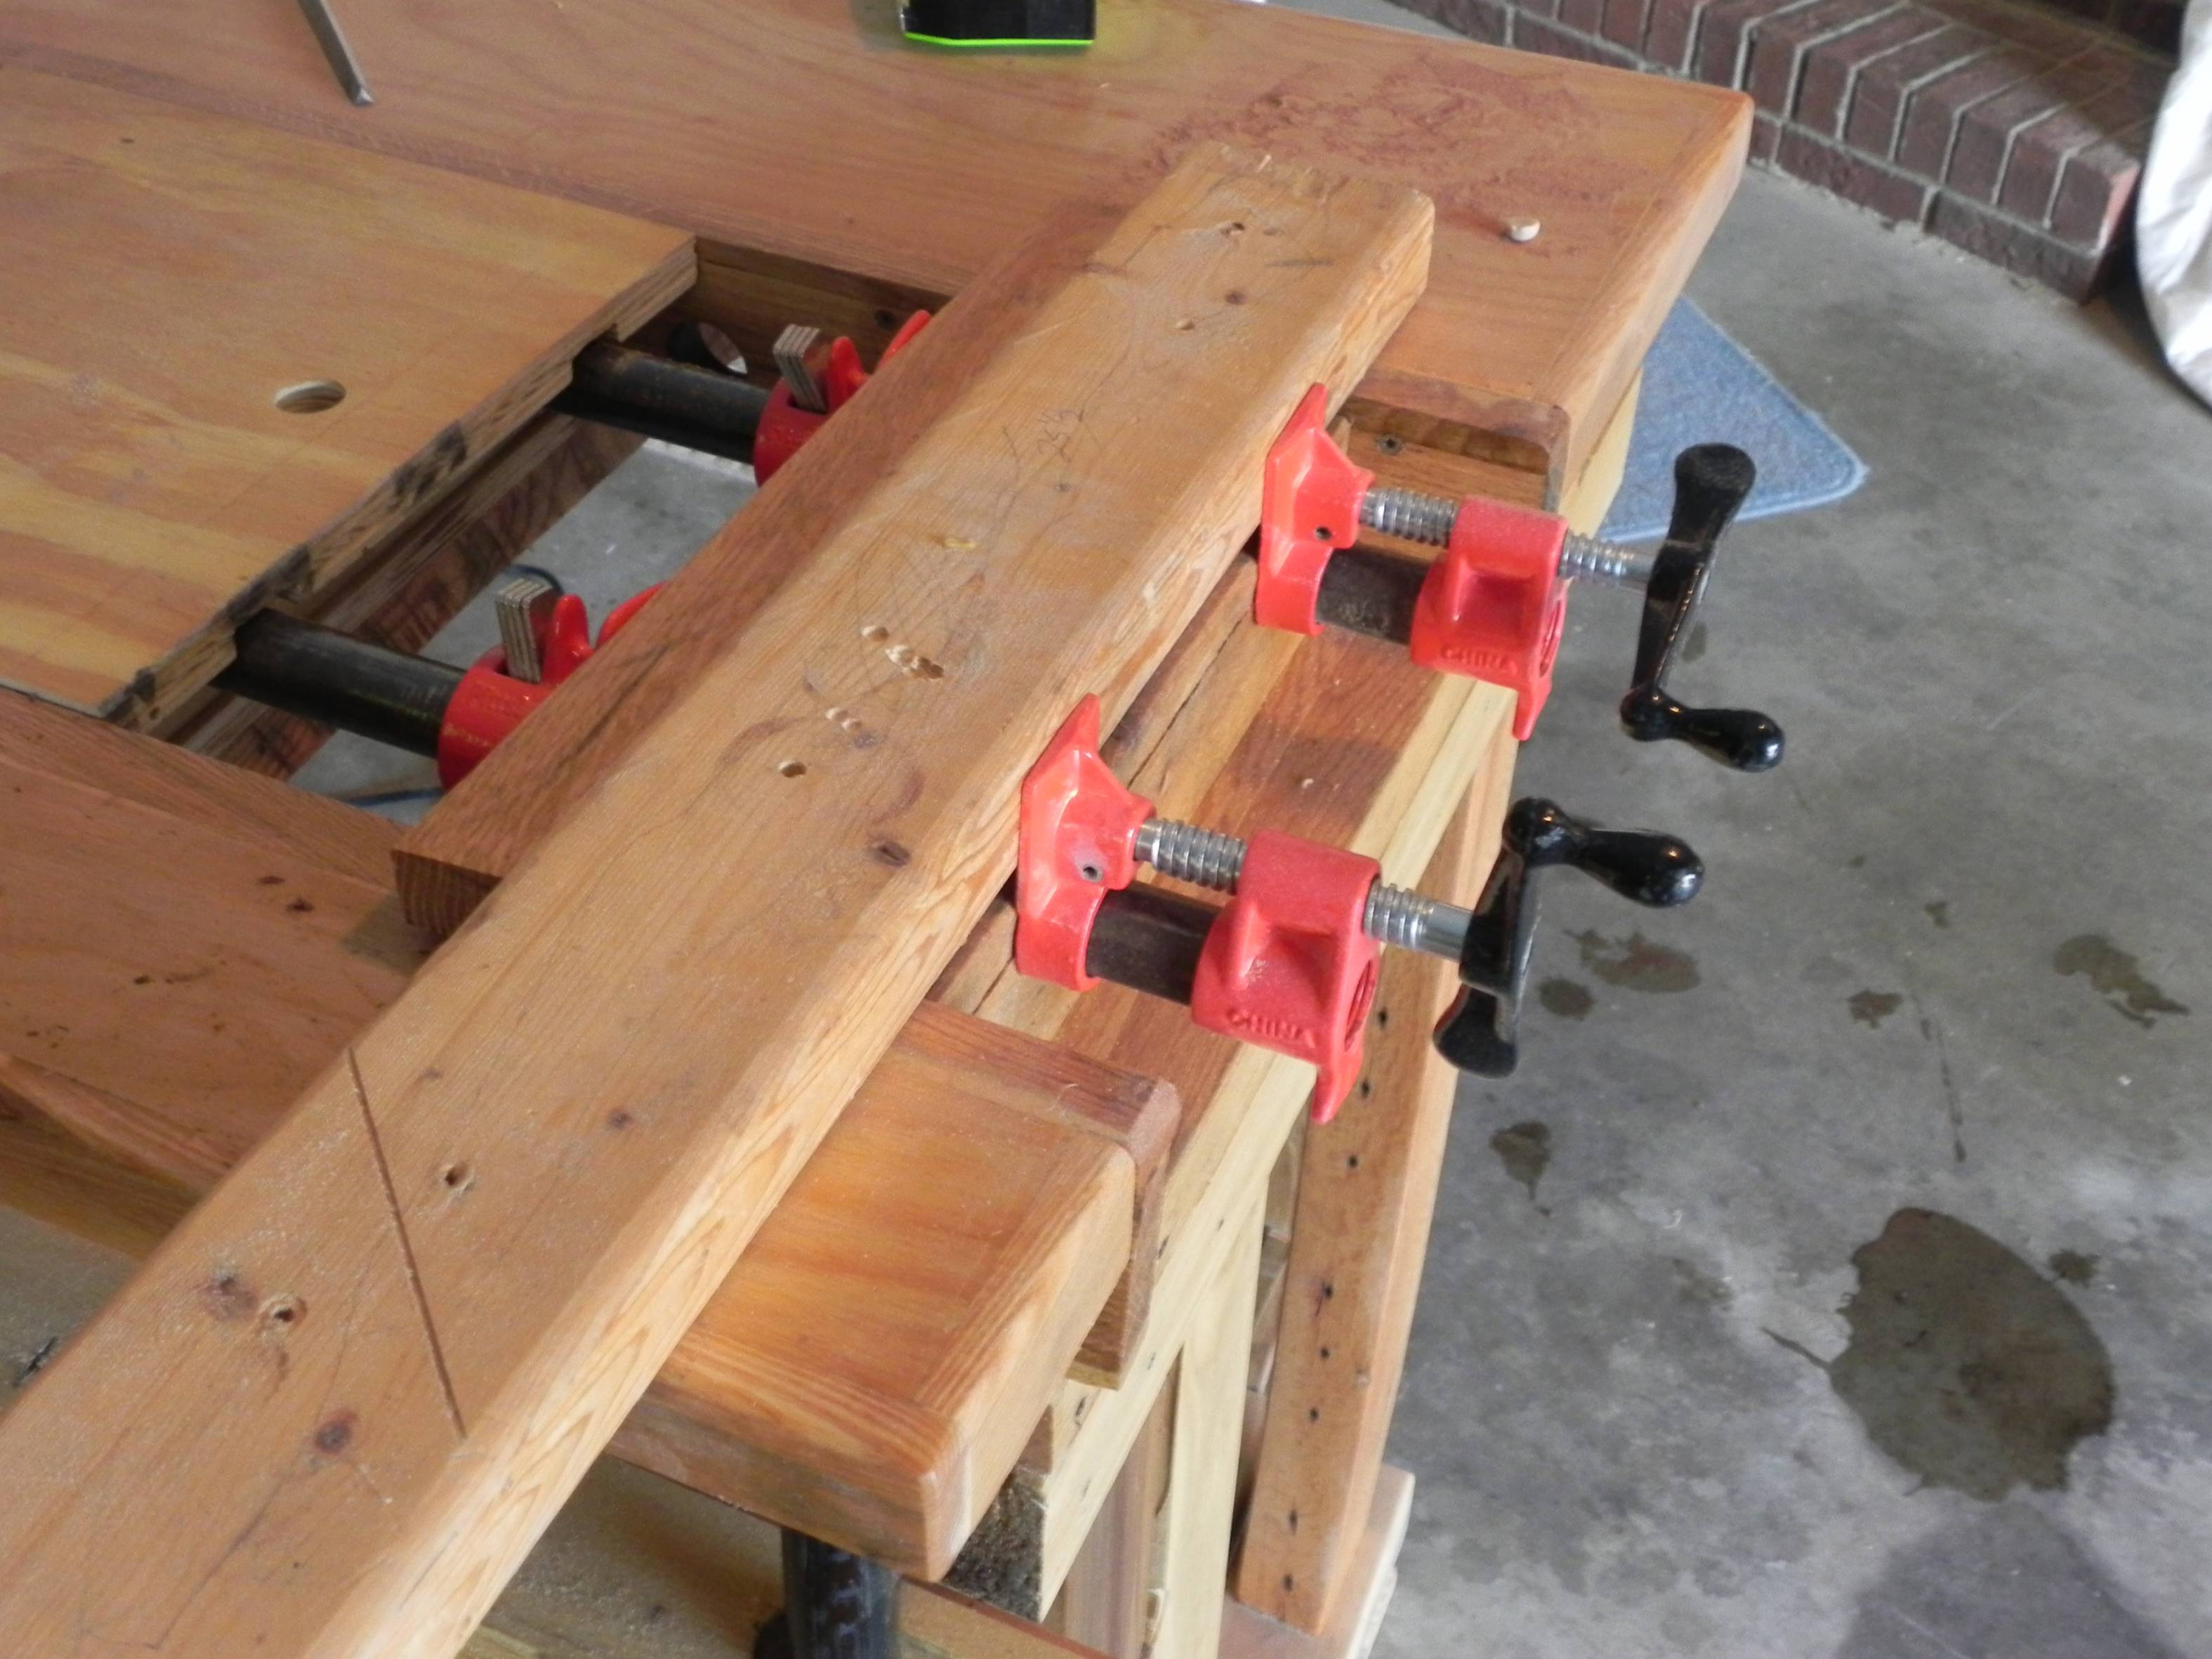 New Fangled Work Bench - Tail Vise